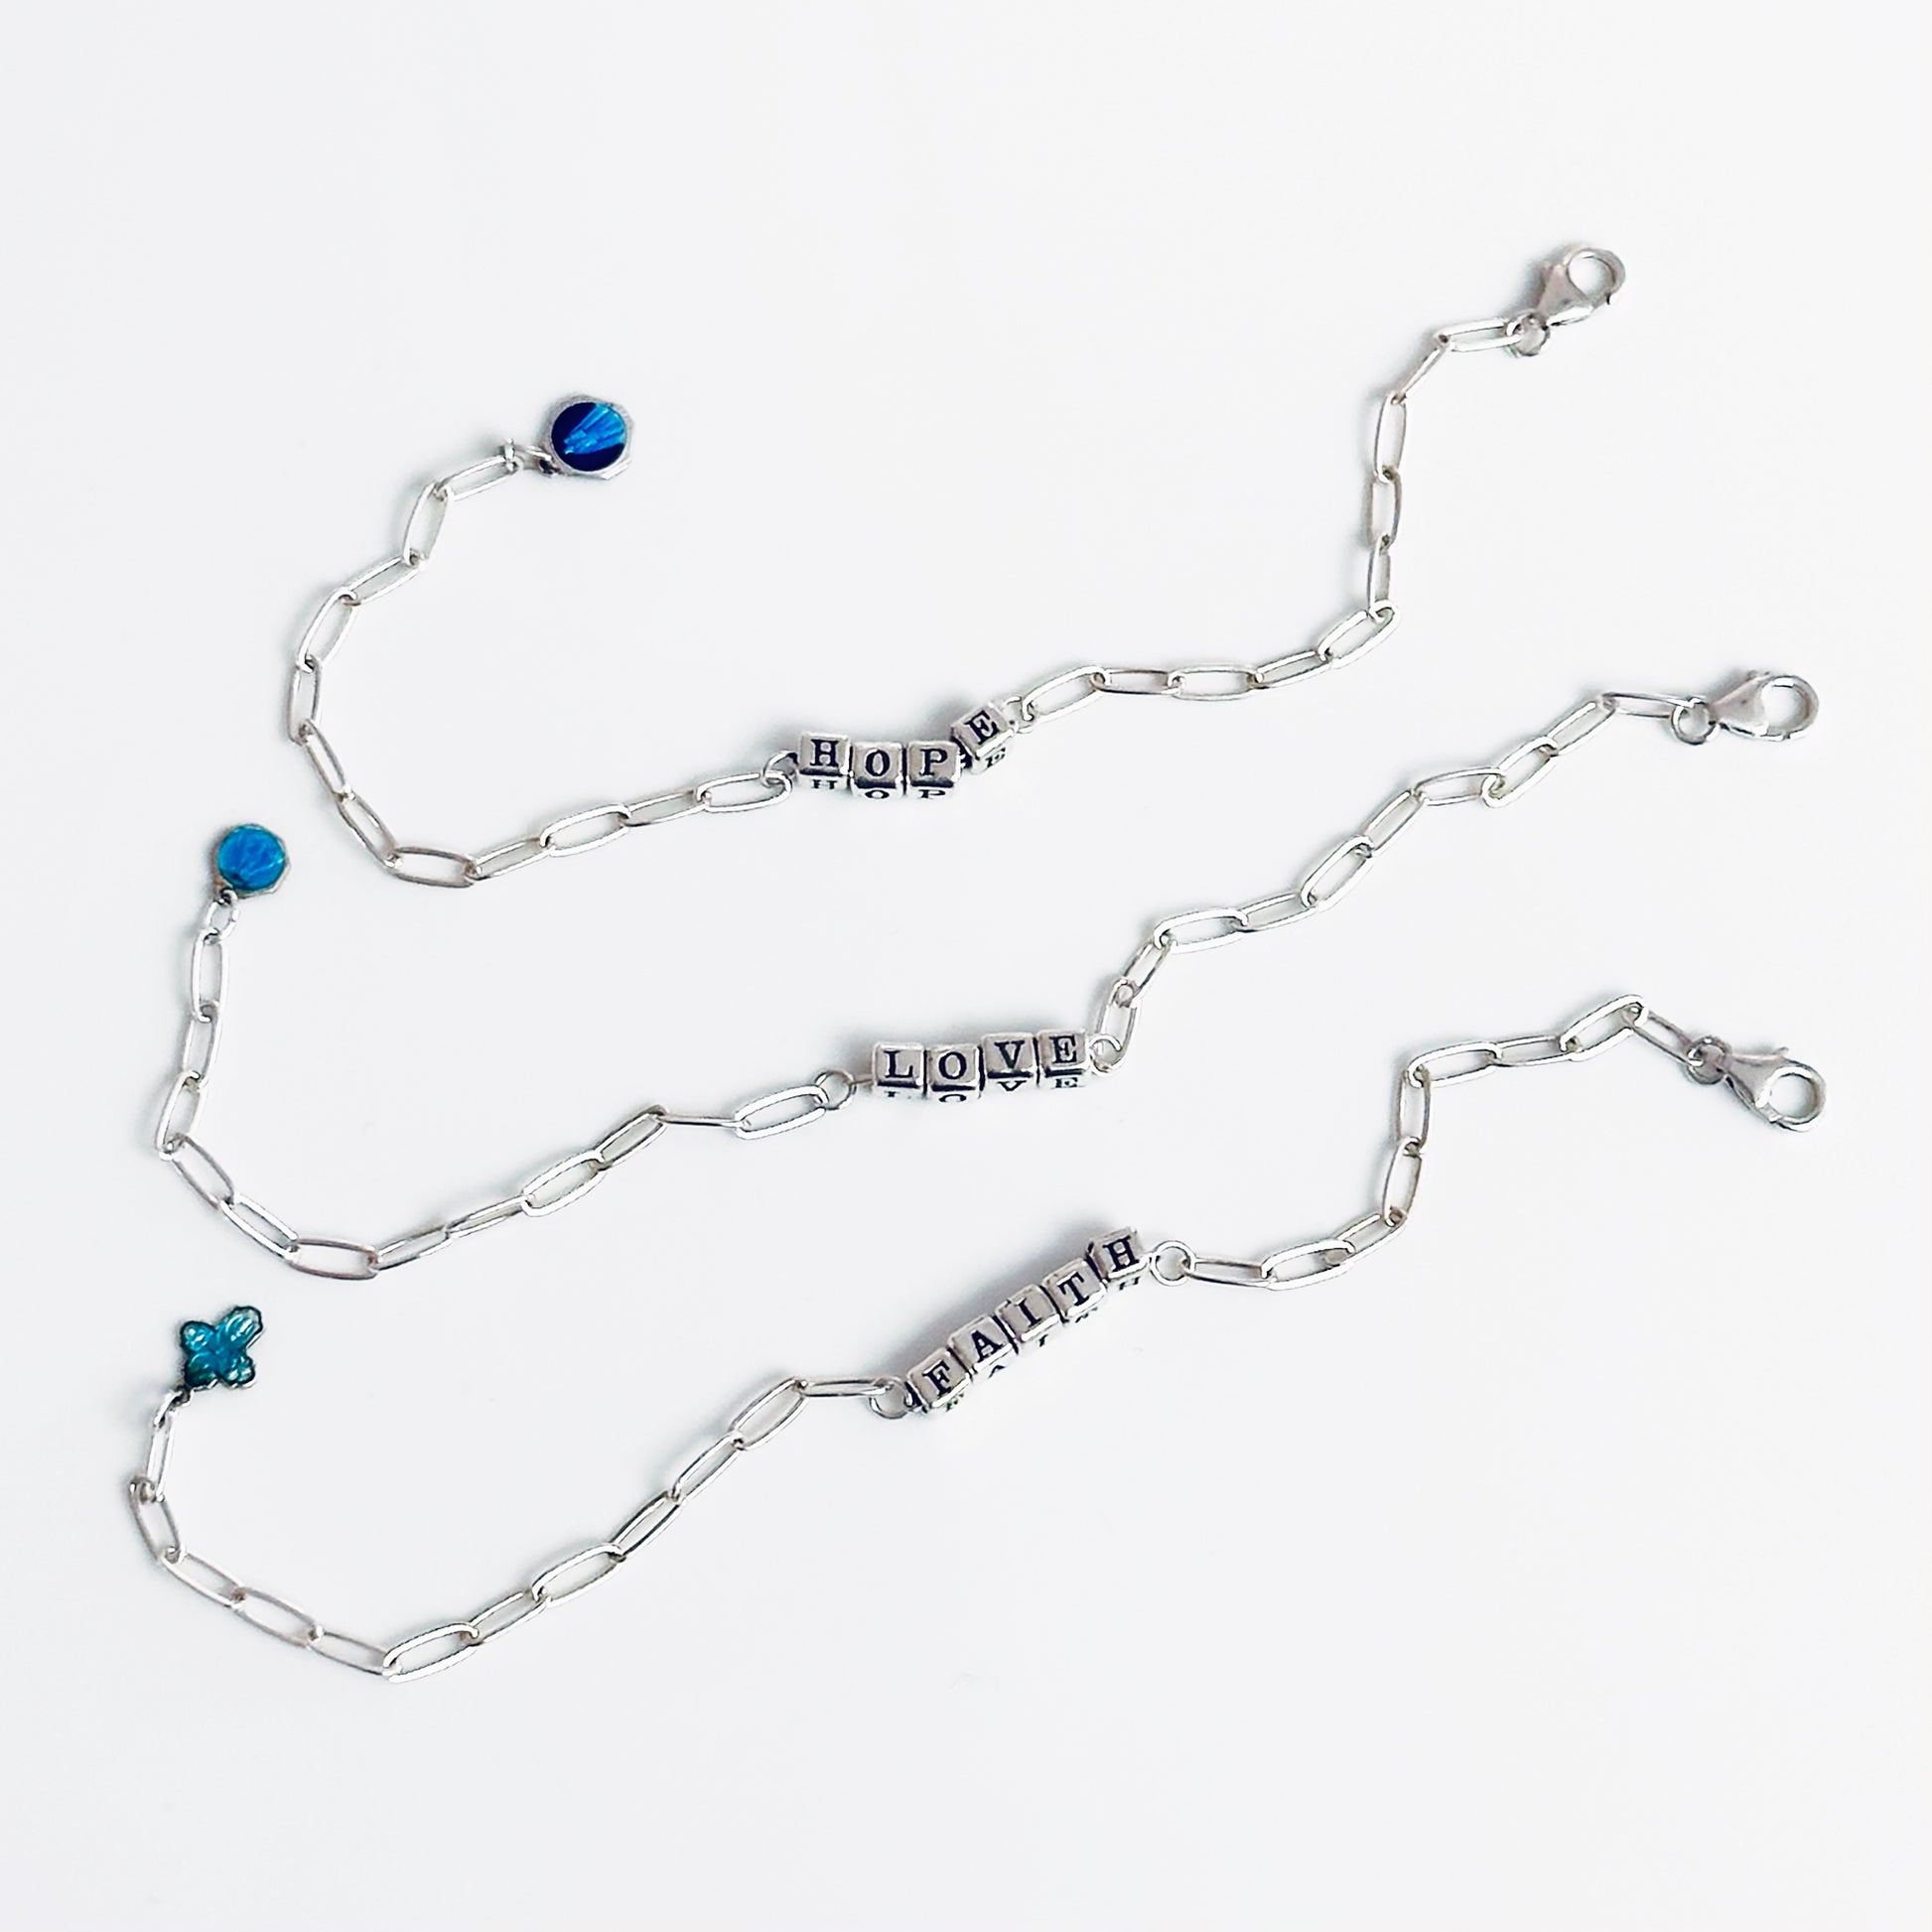 Delicate sterling silver Faith Hope Love message gift bracelets with vintage blue charms